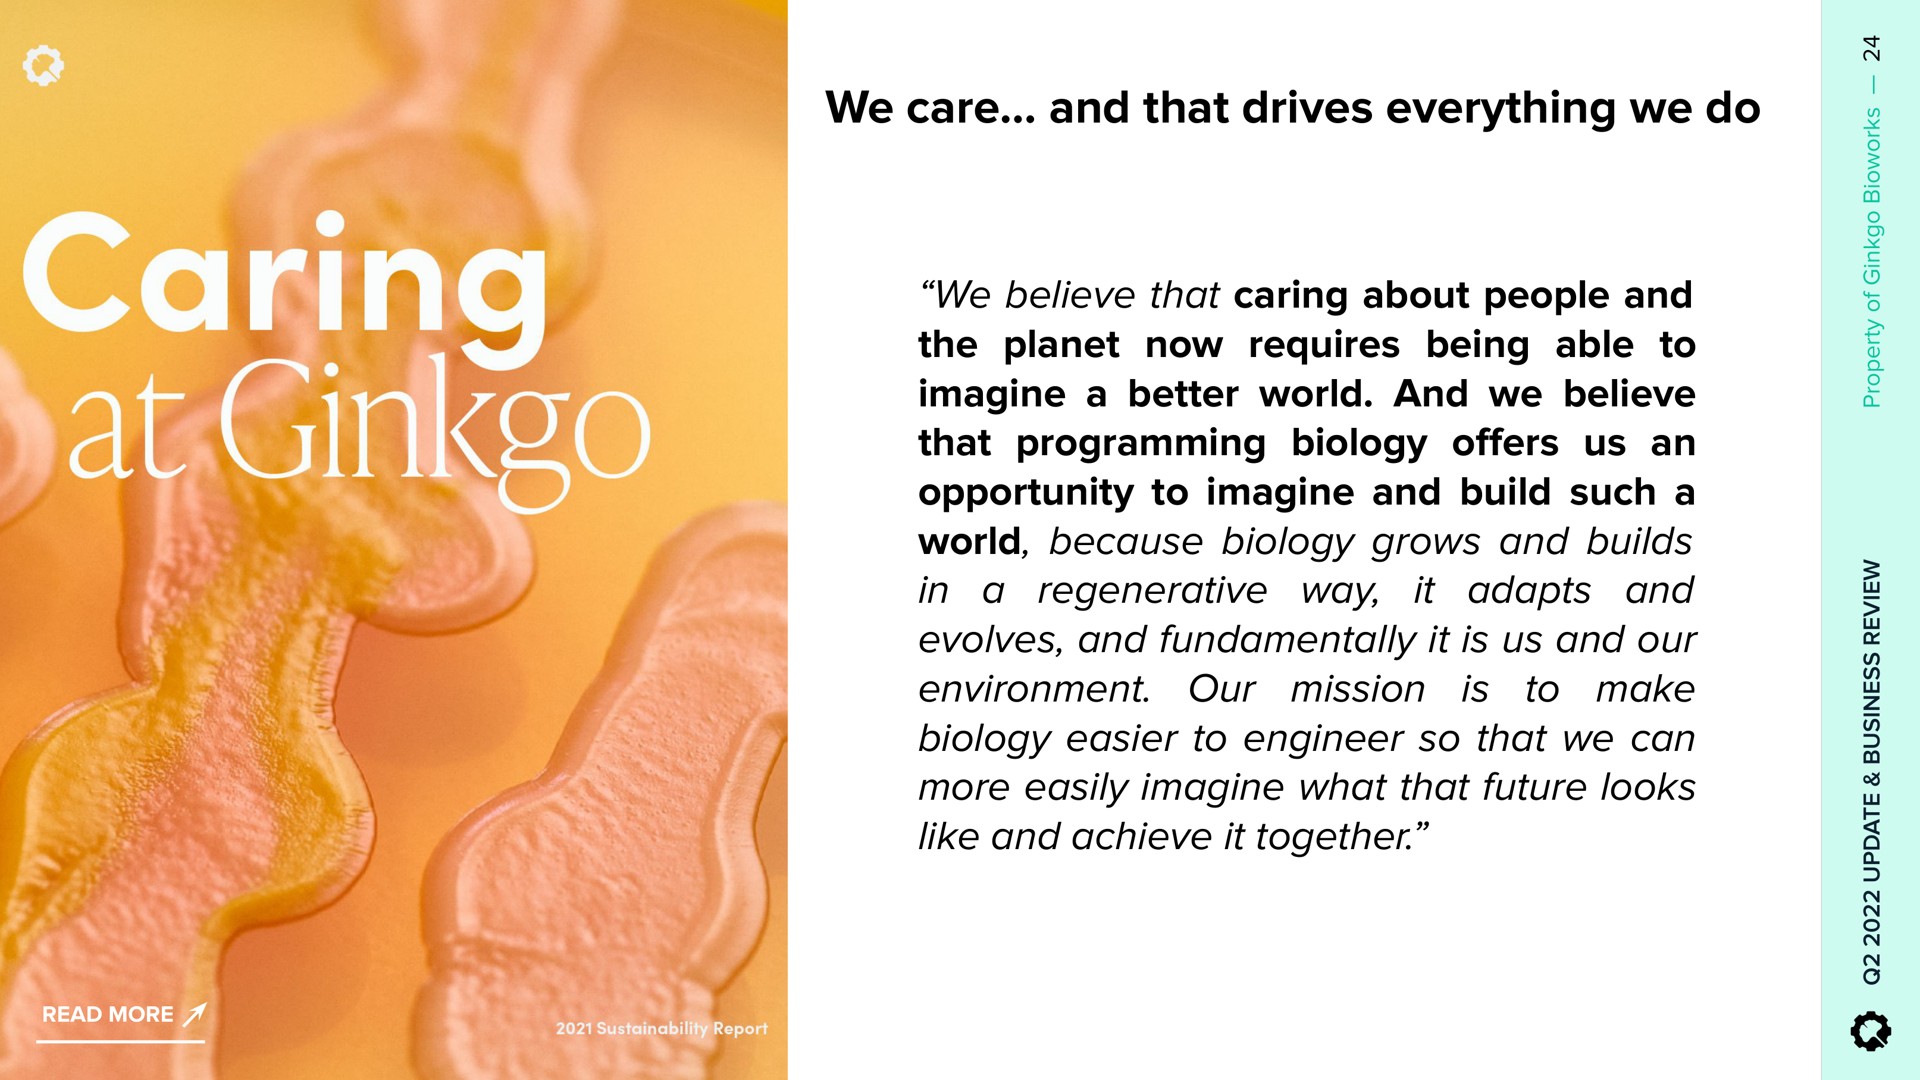 we care and that drives everything we do we believe that caring about people and the planet now requires being able to imagine a better world and we believe that programming biology ers us an opportunity to imagine and build such a world because biology grows and builds it adapts and in a regenerative way evolves and fundamentally it is us and our to make environment our mission biology easier to engineer so that we can more easily imagine what that future looks like and achieve it together is or ring ginkgo offers | Ginkgo